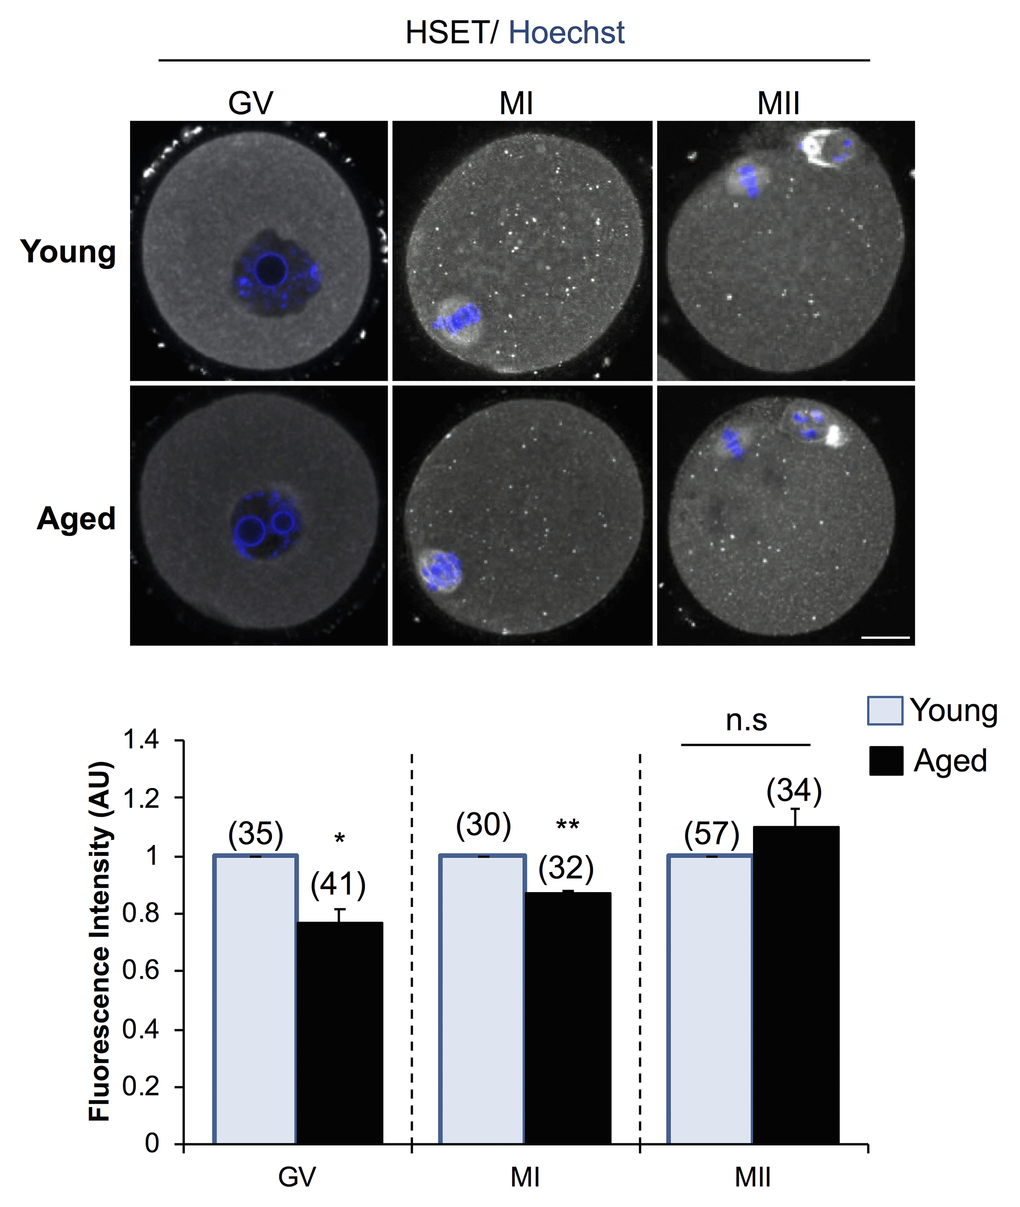 Expression of HSET protein in young and aged oocytes. Immunofluorescence analysis of HSET in young and aged GV, MI, and MII stage oocytes was utilized to determine whether an age-related decrease in Kifc1 and Kifc5b transcript abundance presages an equivalent decrease in protein abundance. Oocytes were labelled with anti-HSET antibodies followed by goat anti-rabbit 633 Alexa Fluor-conjugated (grey) secondary antibodies. Oocytes were then counterstained with the nuclear stain Hoechst 33342 (blue) and viewed using confocal microscopy. Scale bar = 20 μm. These experiments were repeated using three independent biological replicates, with each comprising a minimum of 10 oocytes, and representative images are shown. The immunofluorescence intensity of the entire cell was calculated for each oocyte as described in the Materials and Methods, and the mean of each biological replicate values ± SEM are shown. Statistical analyses were performed using Student’s t-test, * p p 